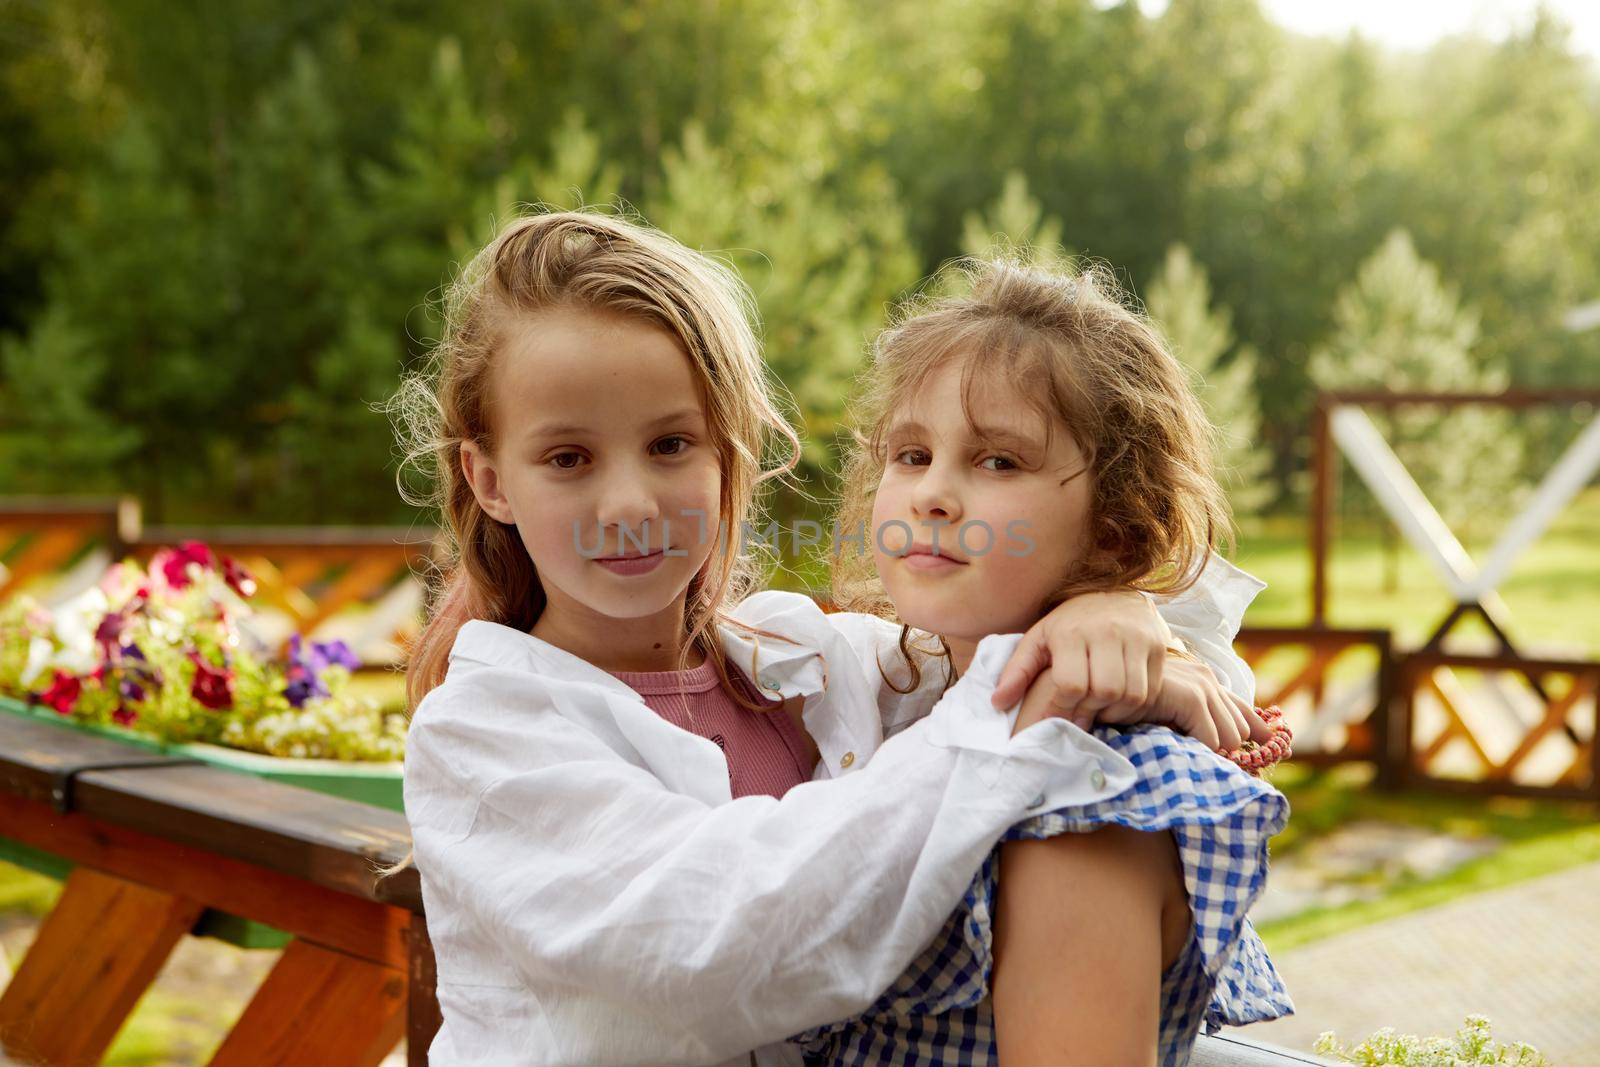 Adorable girl in white shirt embracing friend in checkered garment and looking at camera while resting near terrace railing on summer weekend day